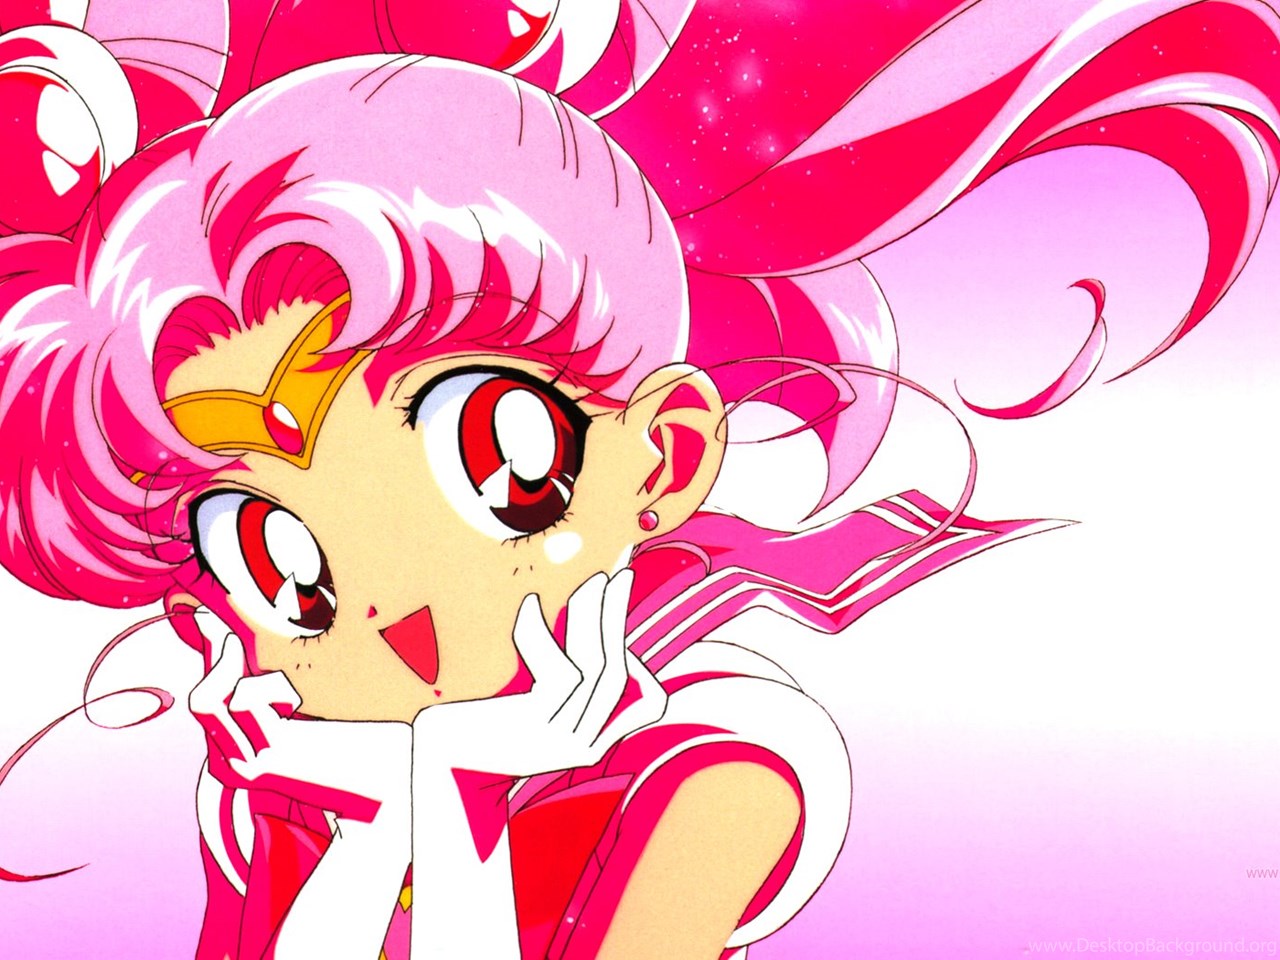 Download Moonkitty.net: Sailor Moon Wallpapers Widescreen Page 15 Fullscree...